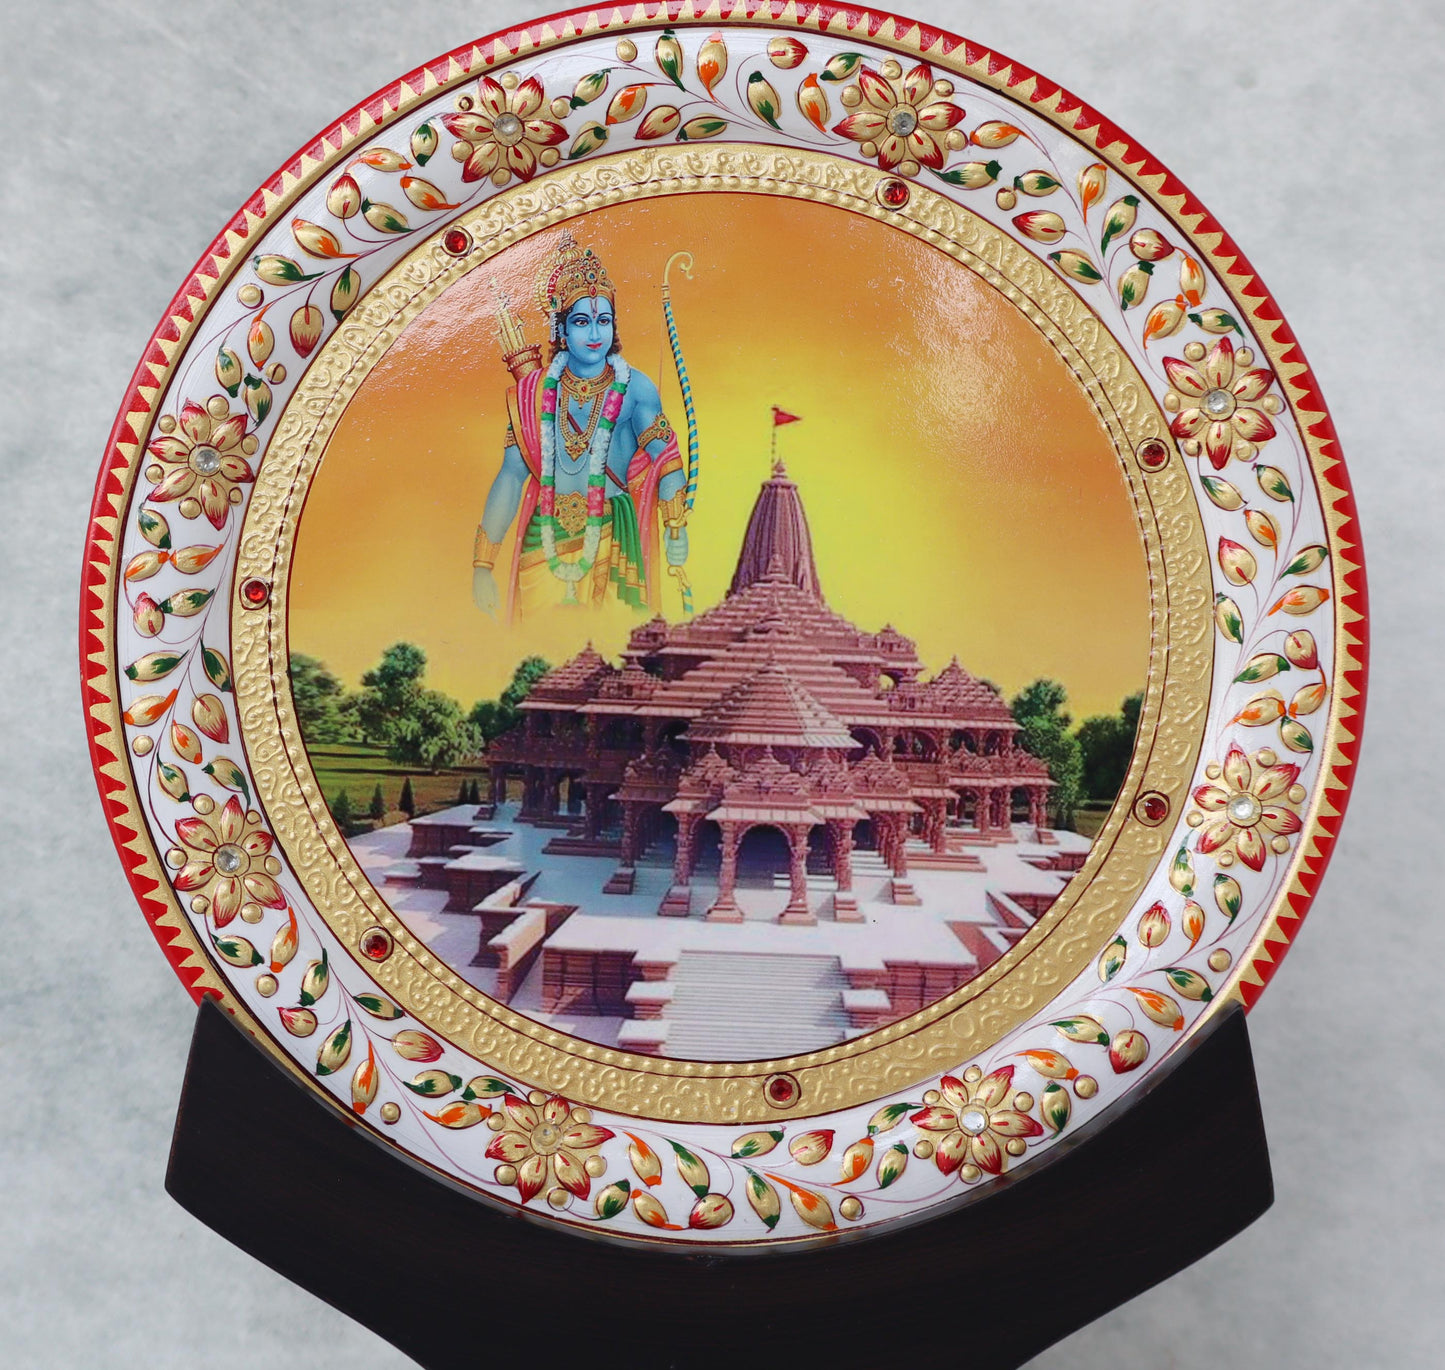 Ayodha Temple Painted On Plate by Satgurus